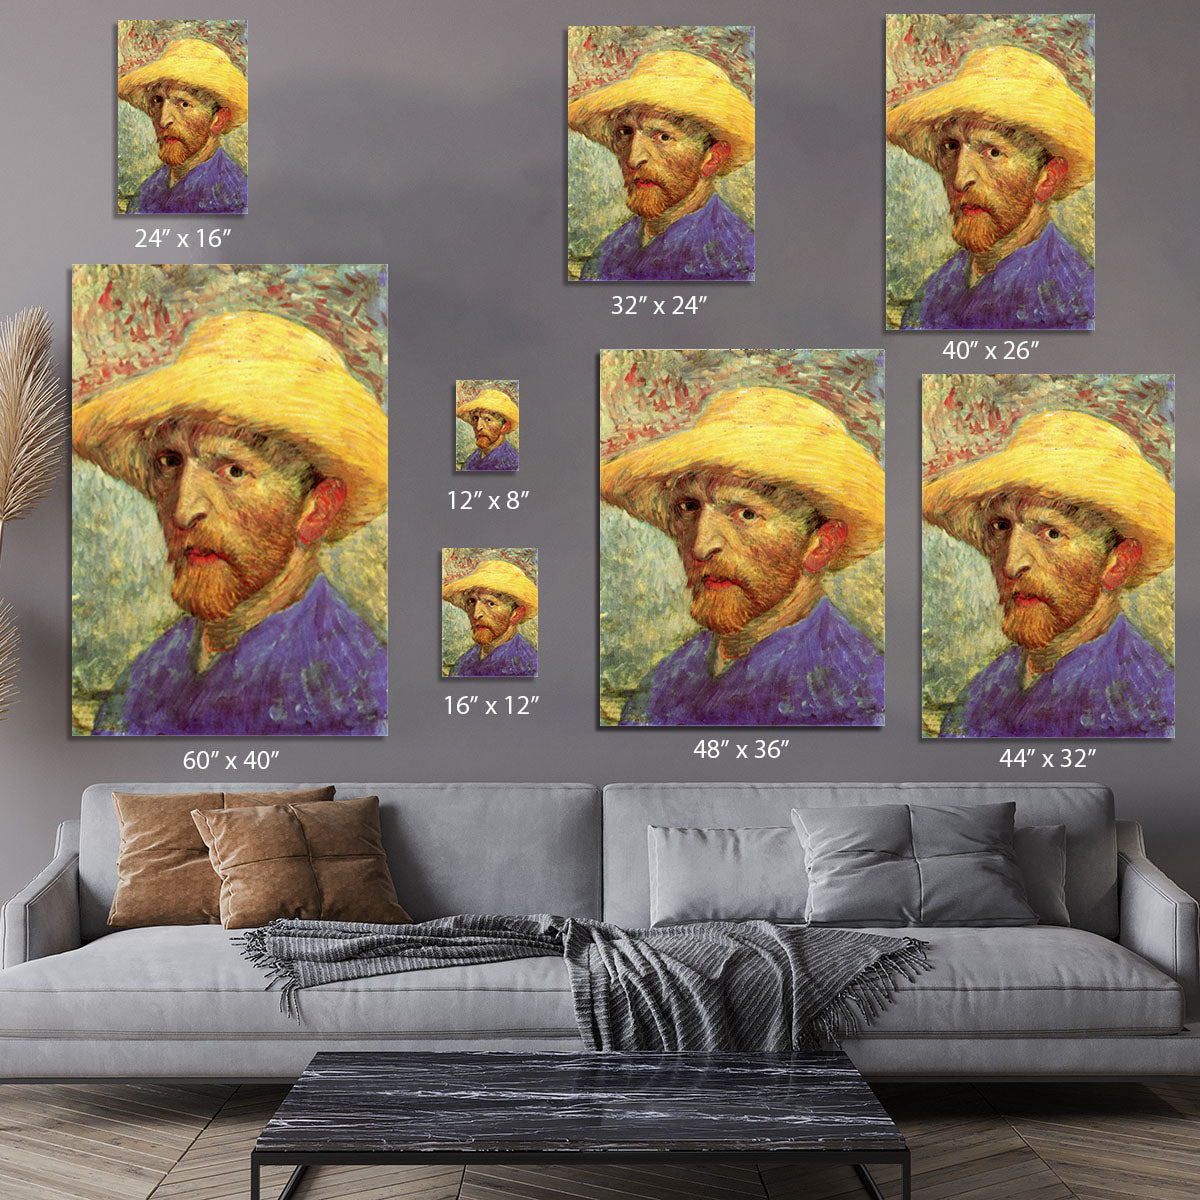 Self-Portrait with Straw Hat 3 by Van Gogh Canvas Print or Poster - Canvas Art Rocks - 7